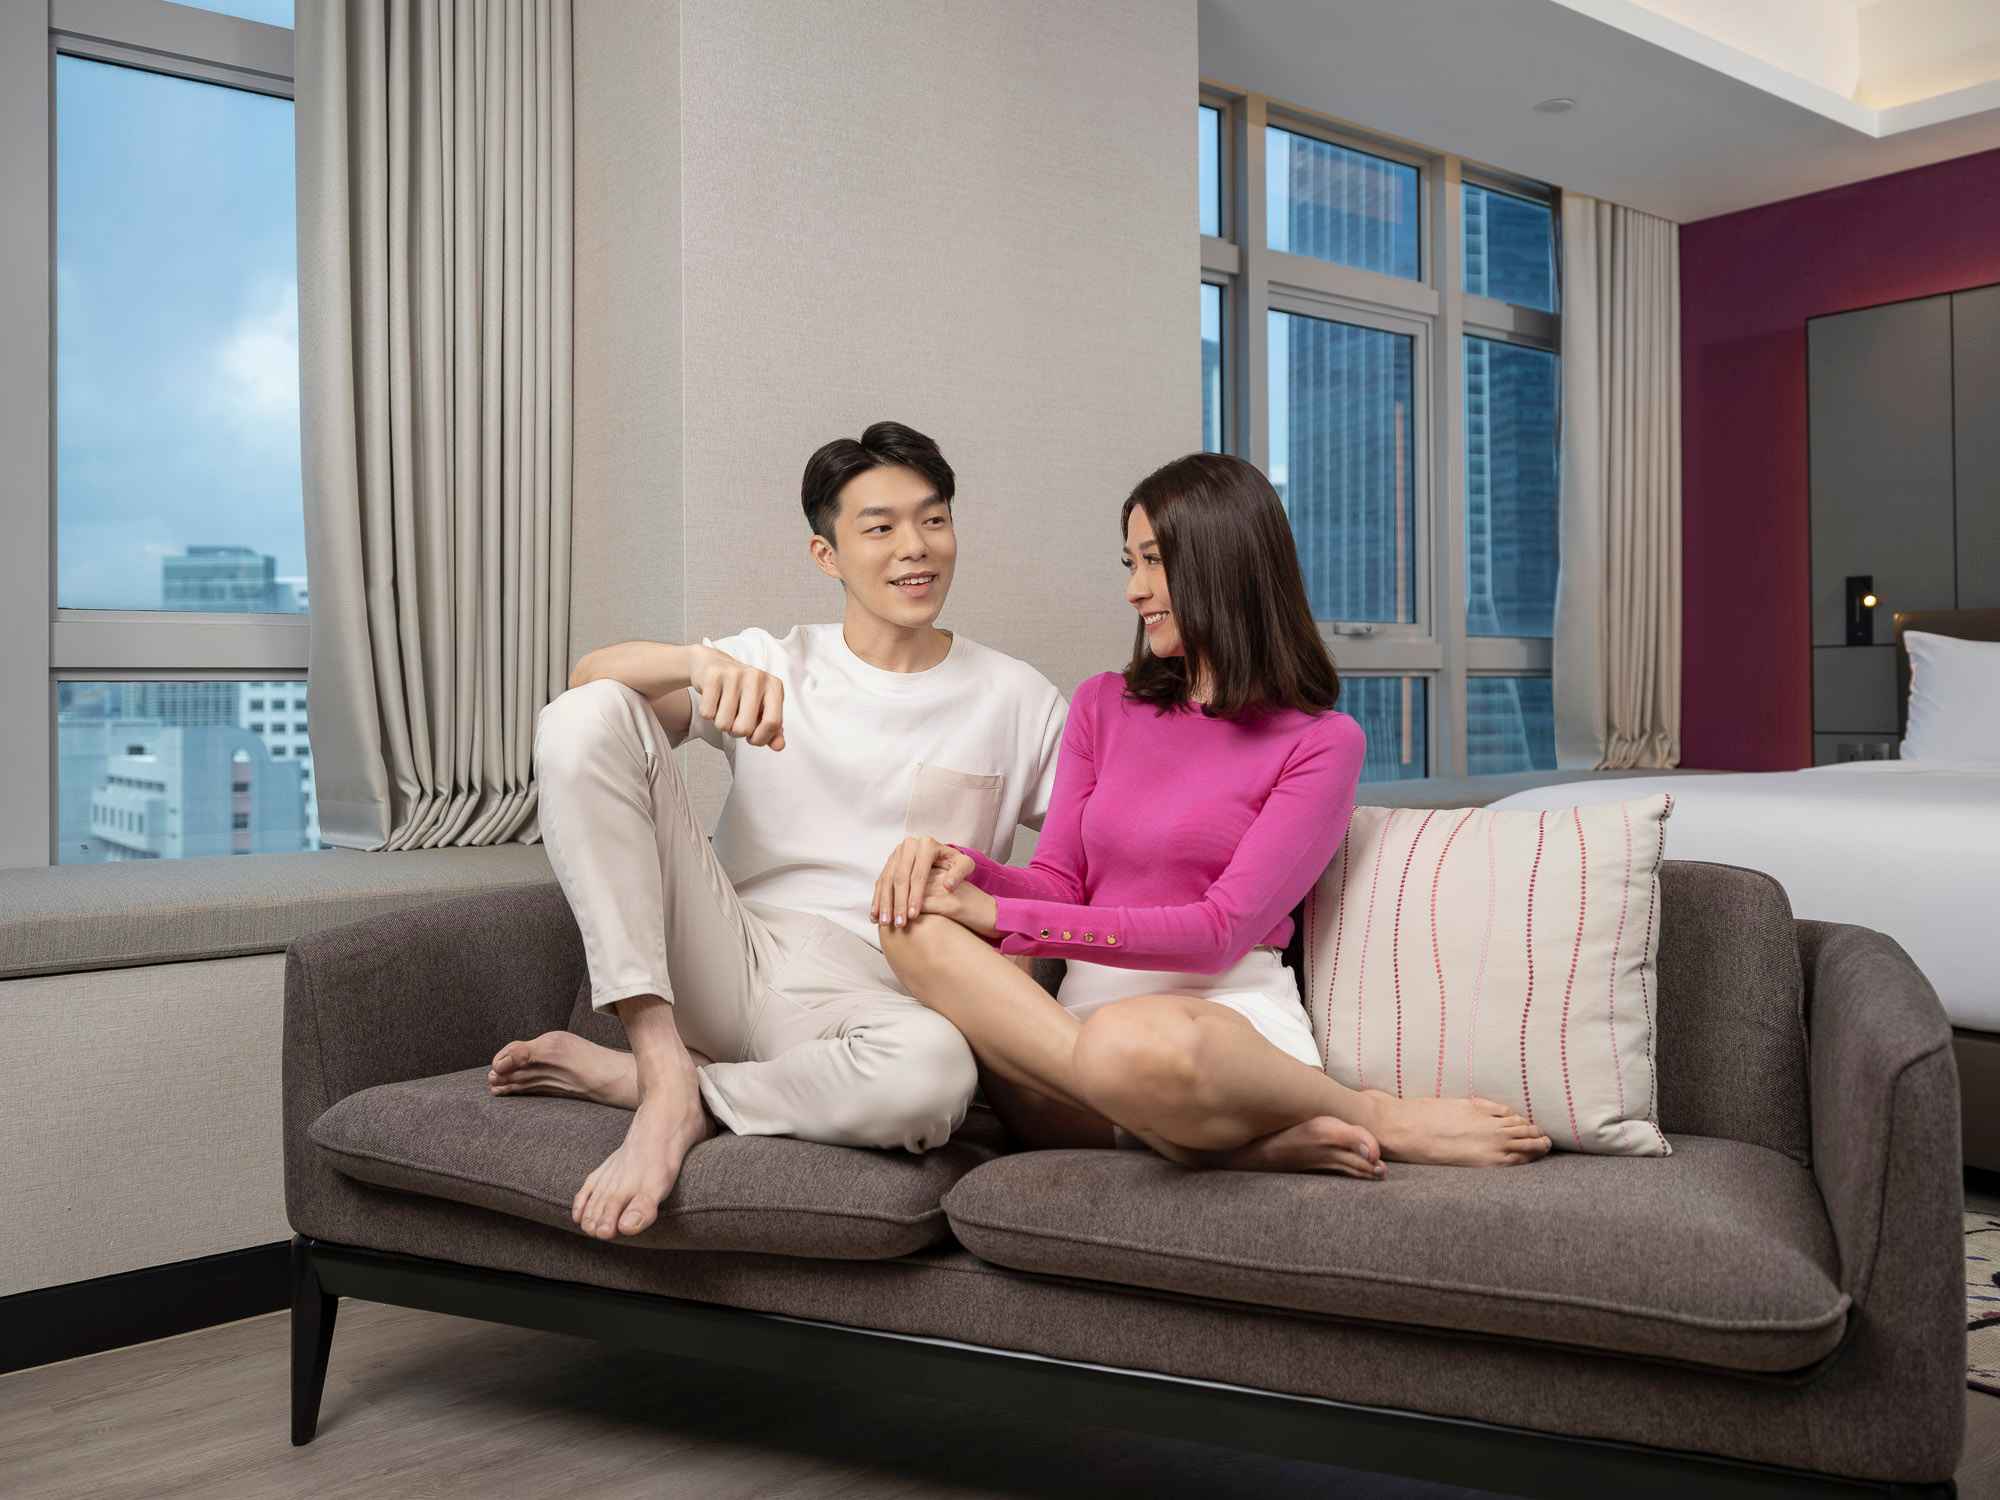 Couple talking on the couch at orchid hotel, photo taken by coco creative studio lifestyle shoot-Orchid-lifestyle-interior-hospitality-photgraphy-coco-creative-studio-singapore-france